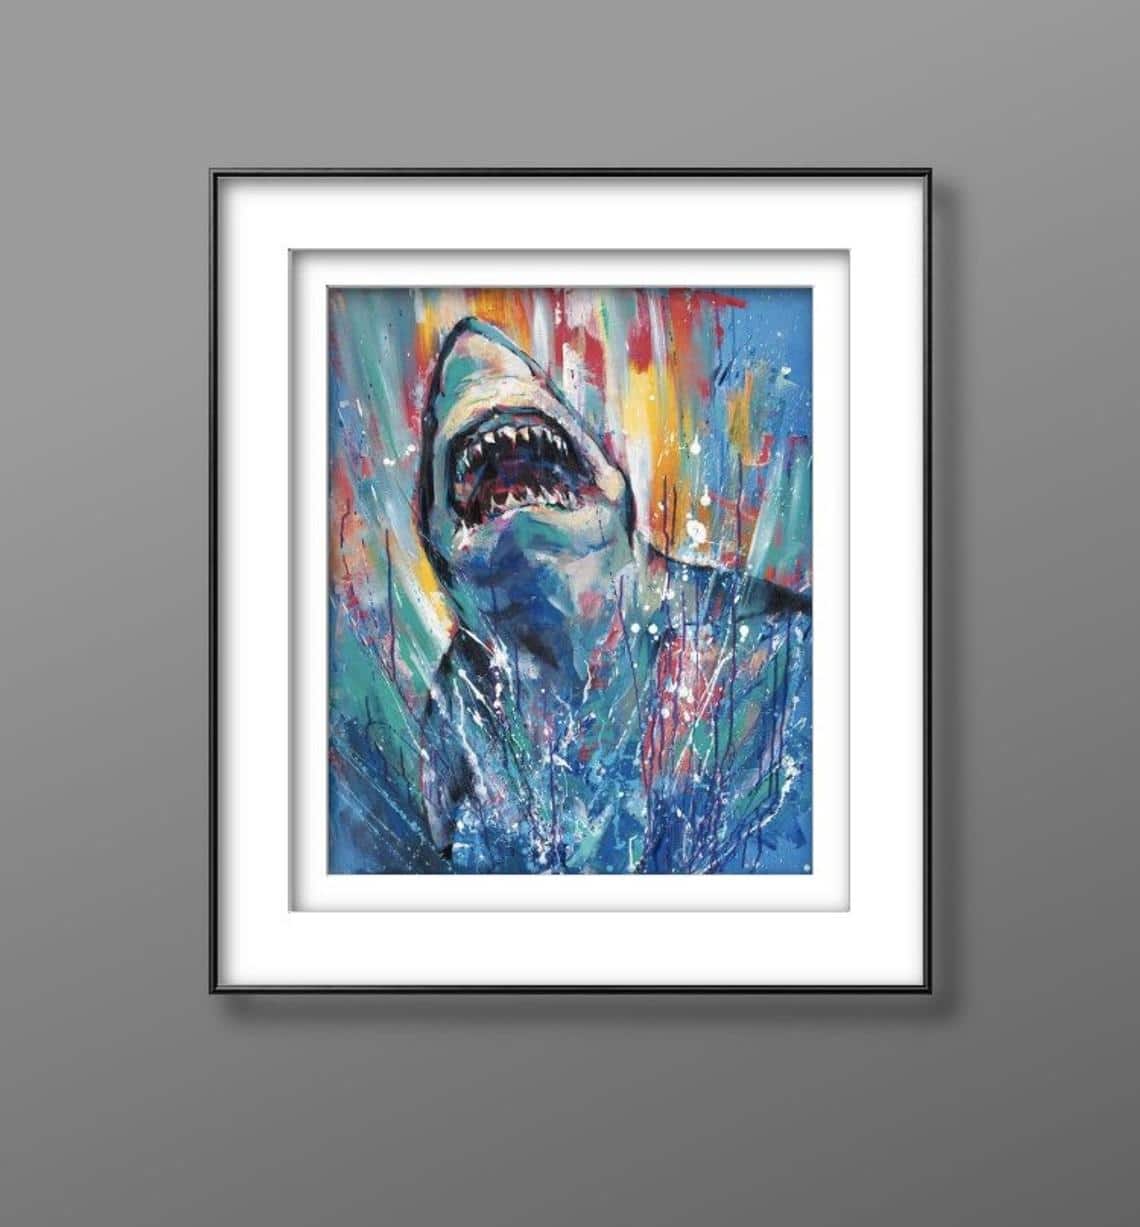 Creative Shark Acrylic to Decorate Your Home